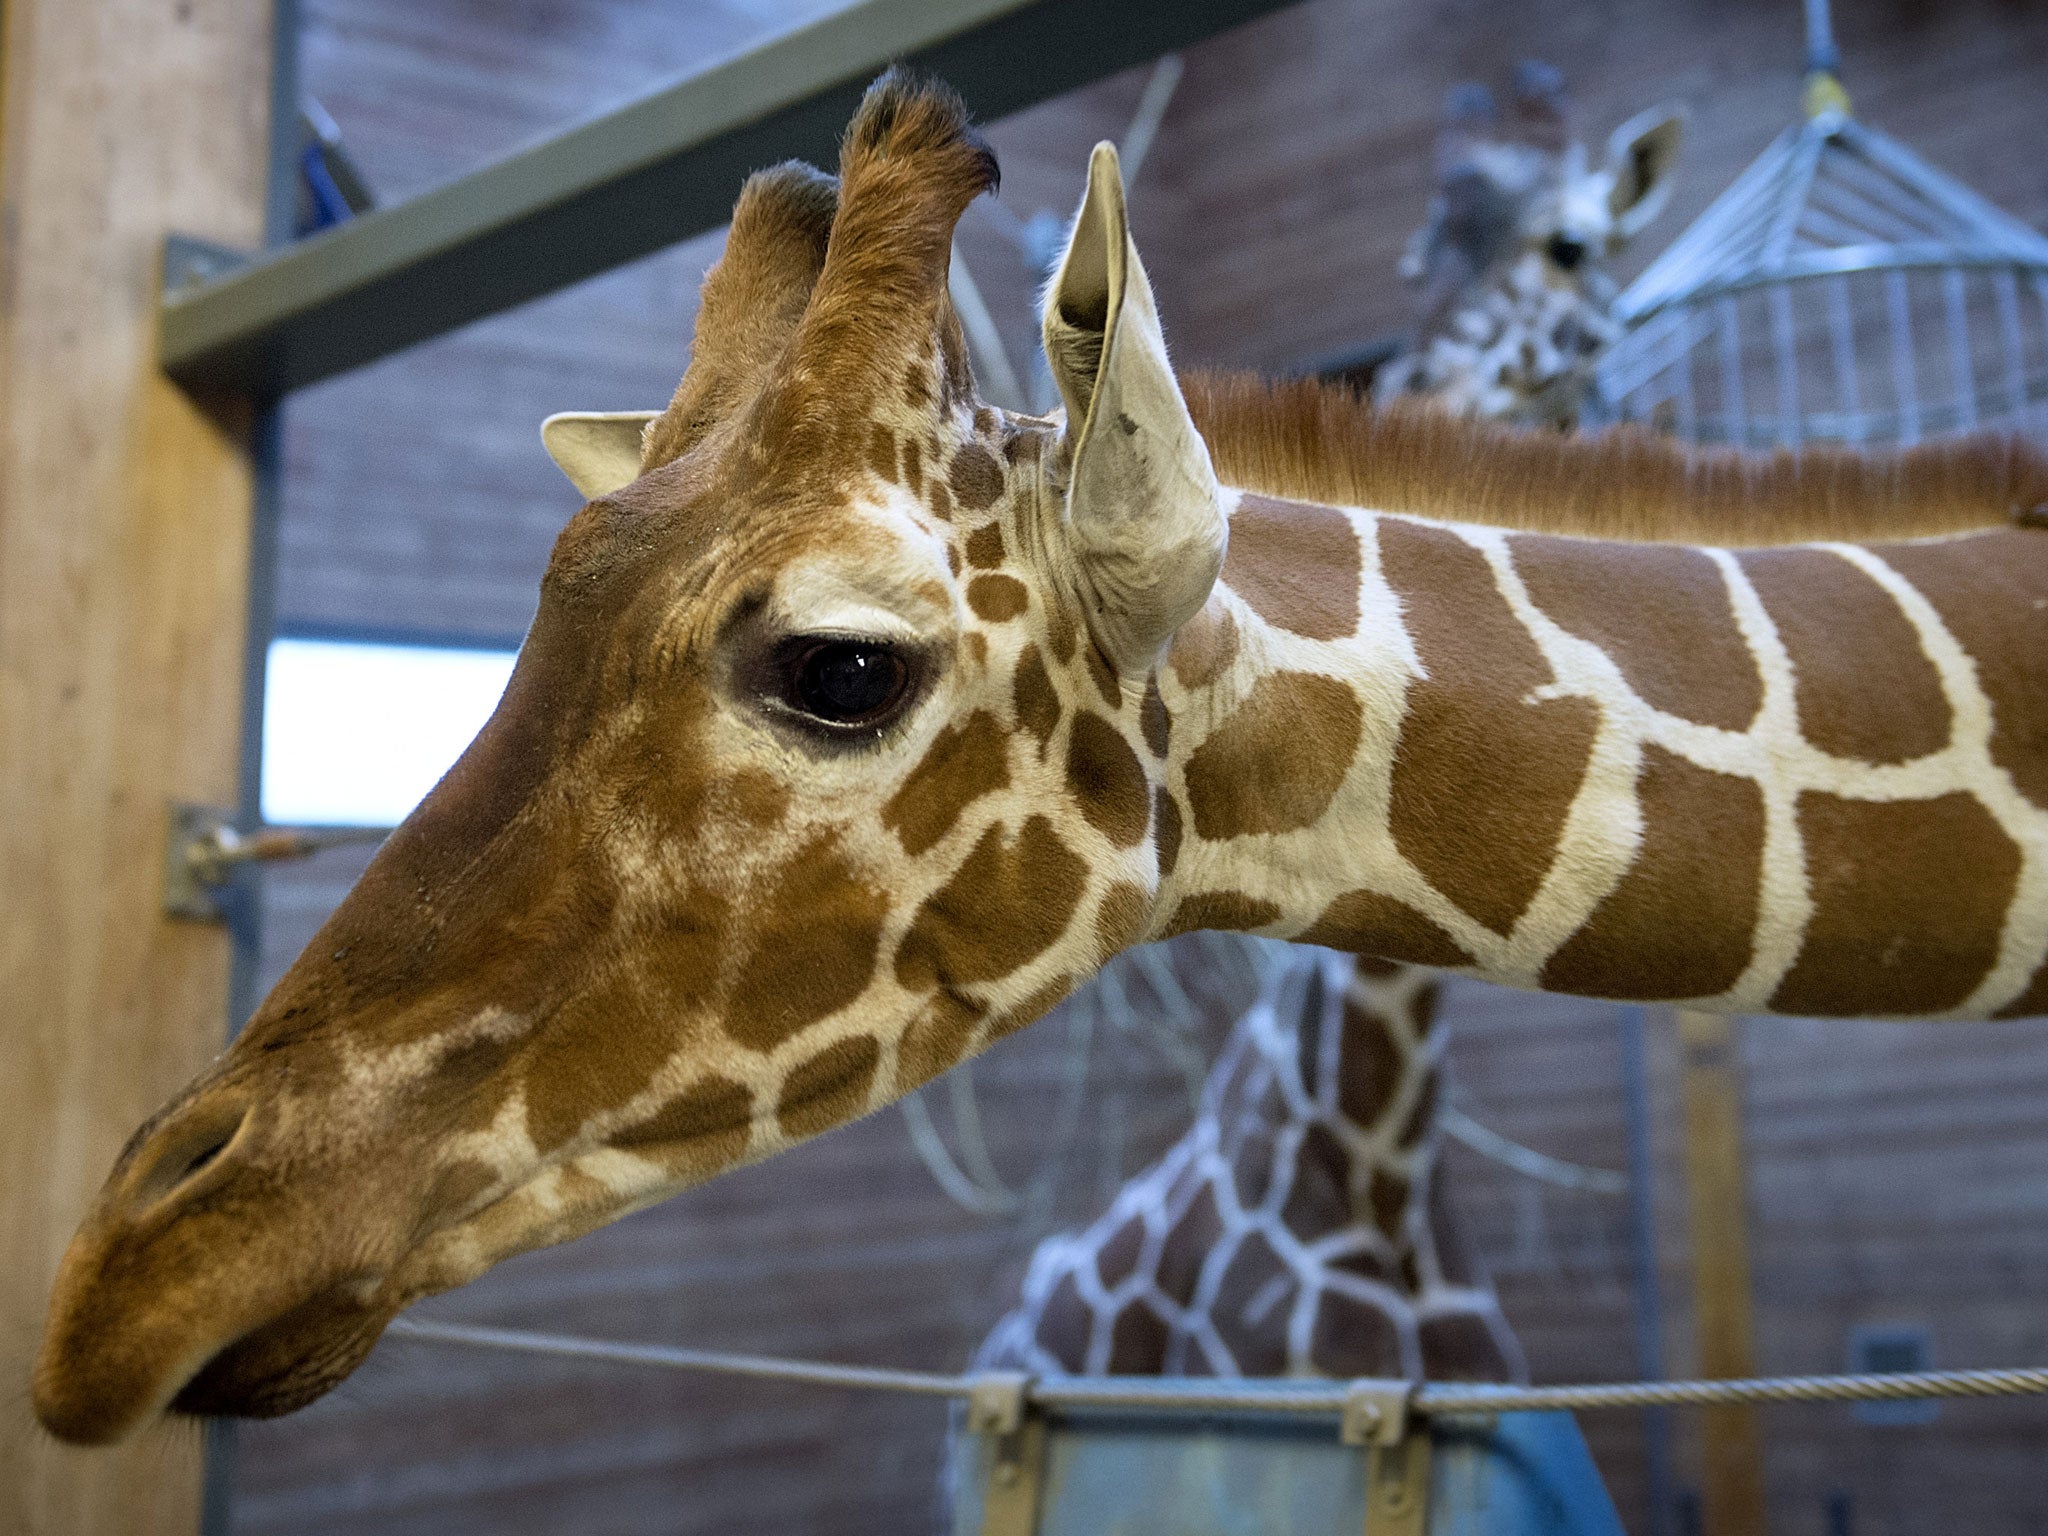 Picture taken on 7 Febuary, 2014, shows a healthy young giraffe named Marius who was shot dead and autopsied in the presence of visitors to the gardens at Copenhagen zoo on 9 Febuary, 2014 despite an online petition to save it signed by thousands of peopl